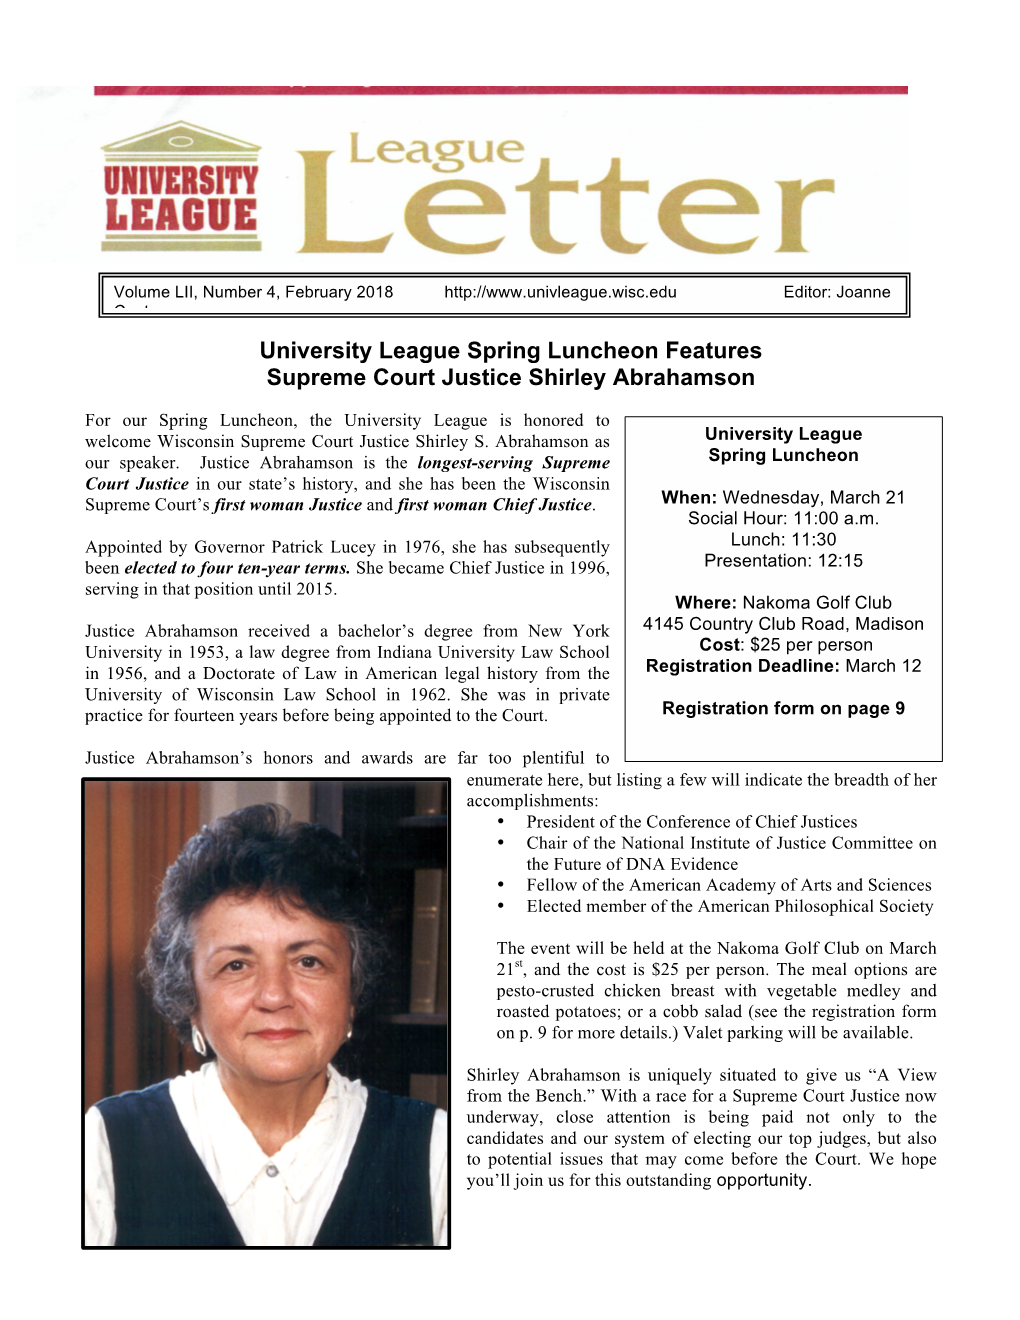 University League Spring Luncheon Features Supreme Court Justice Shirley Abrahamson